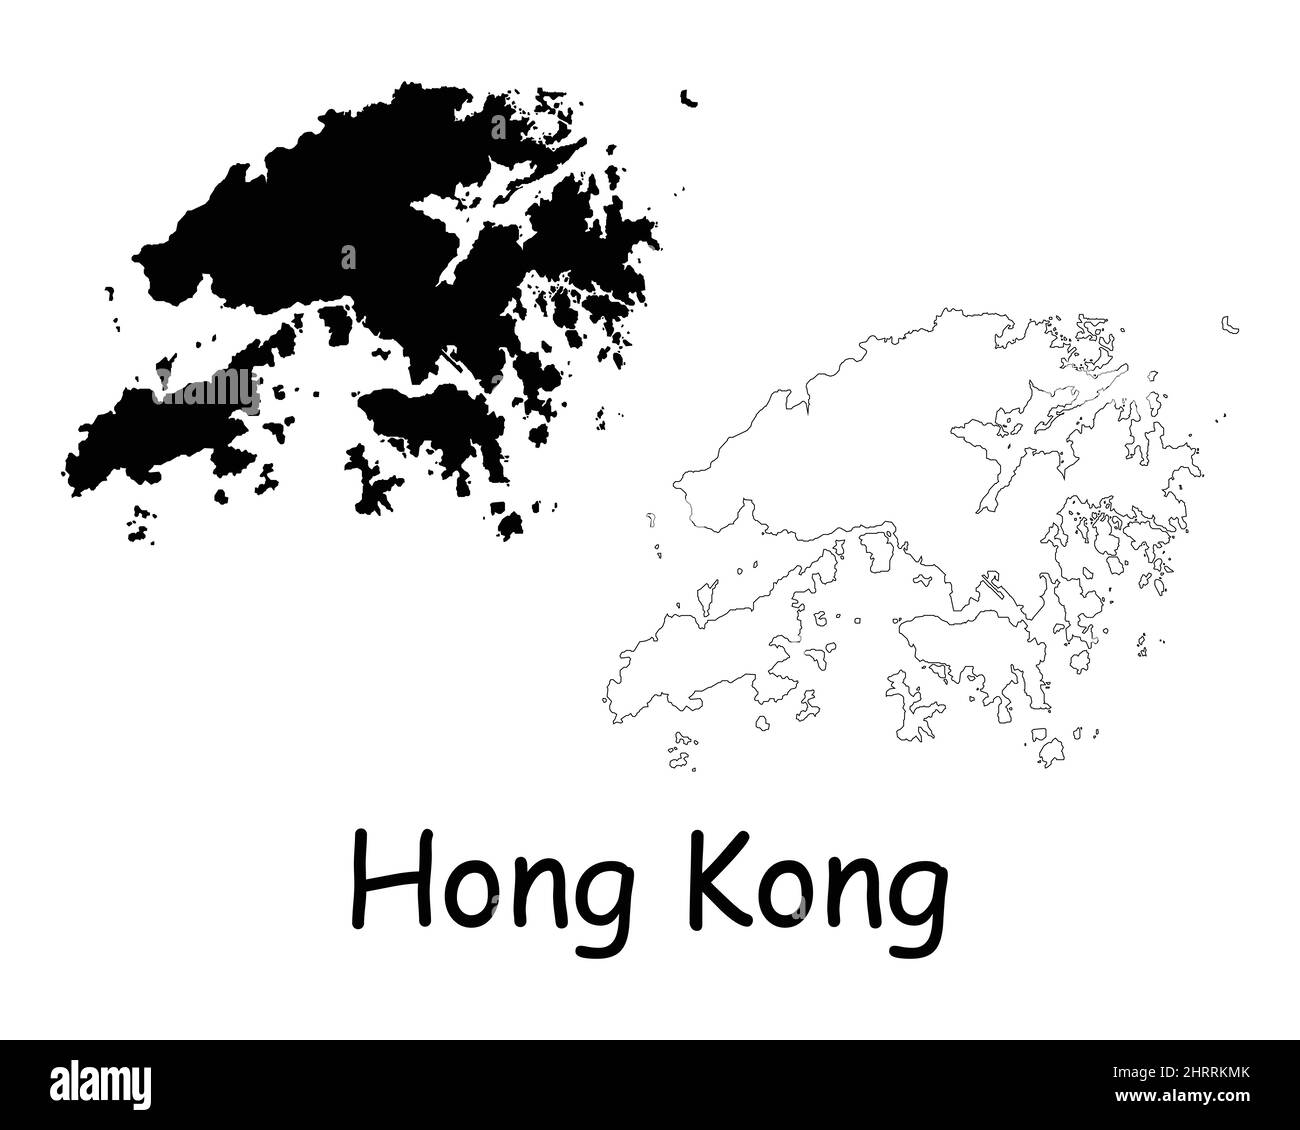 Hong Kong Map. HK HKSAR Black silhouette and outline map isolated on white background. Hong Kong Territory Border Boundary Line Icon Sign Symbol Clipa Stock Vector